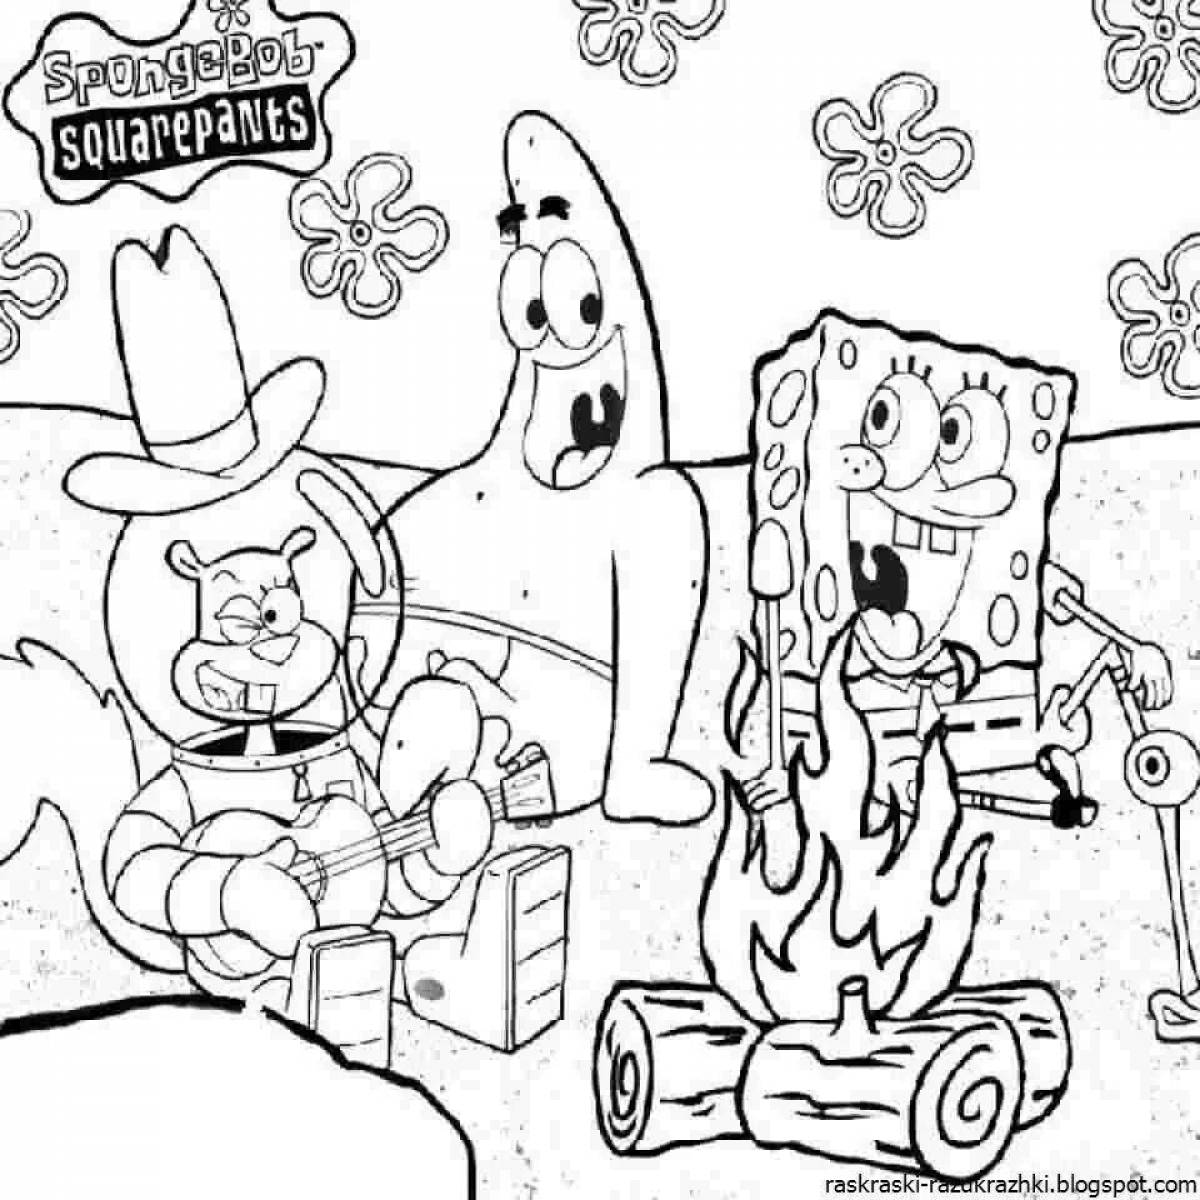 Sweet spongebob coloring pages for girls